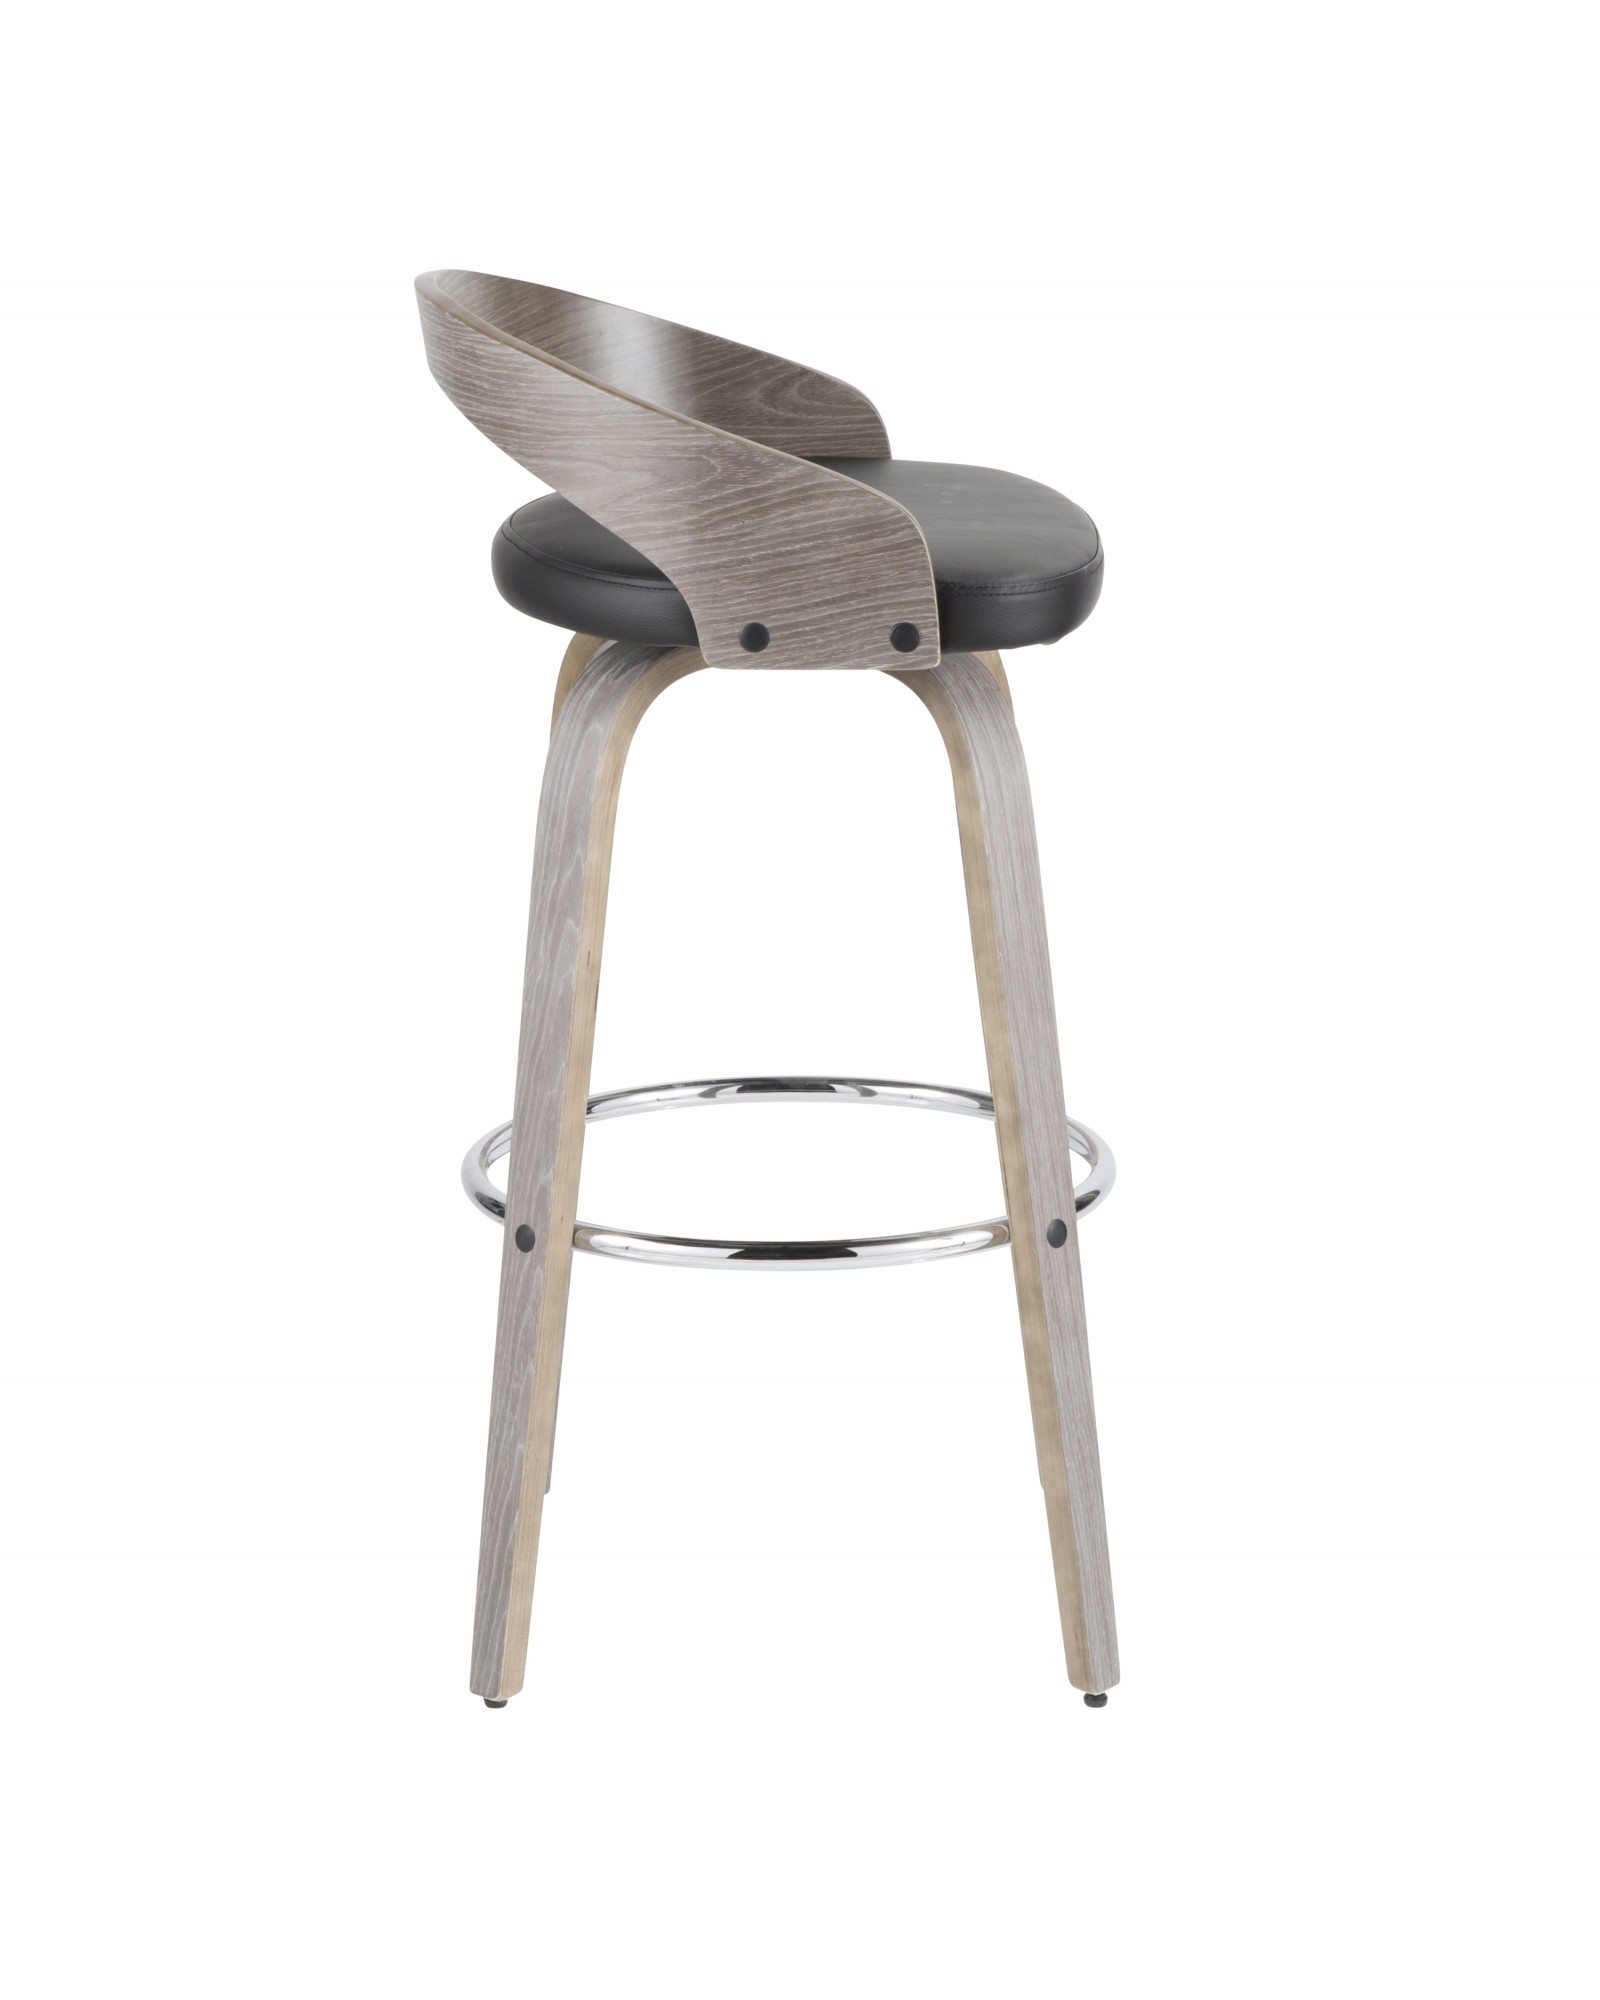 Grotto Mid-Century Modern Barstool with Light Grey Wood and Black Faux Leather